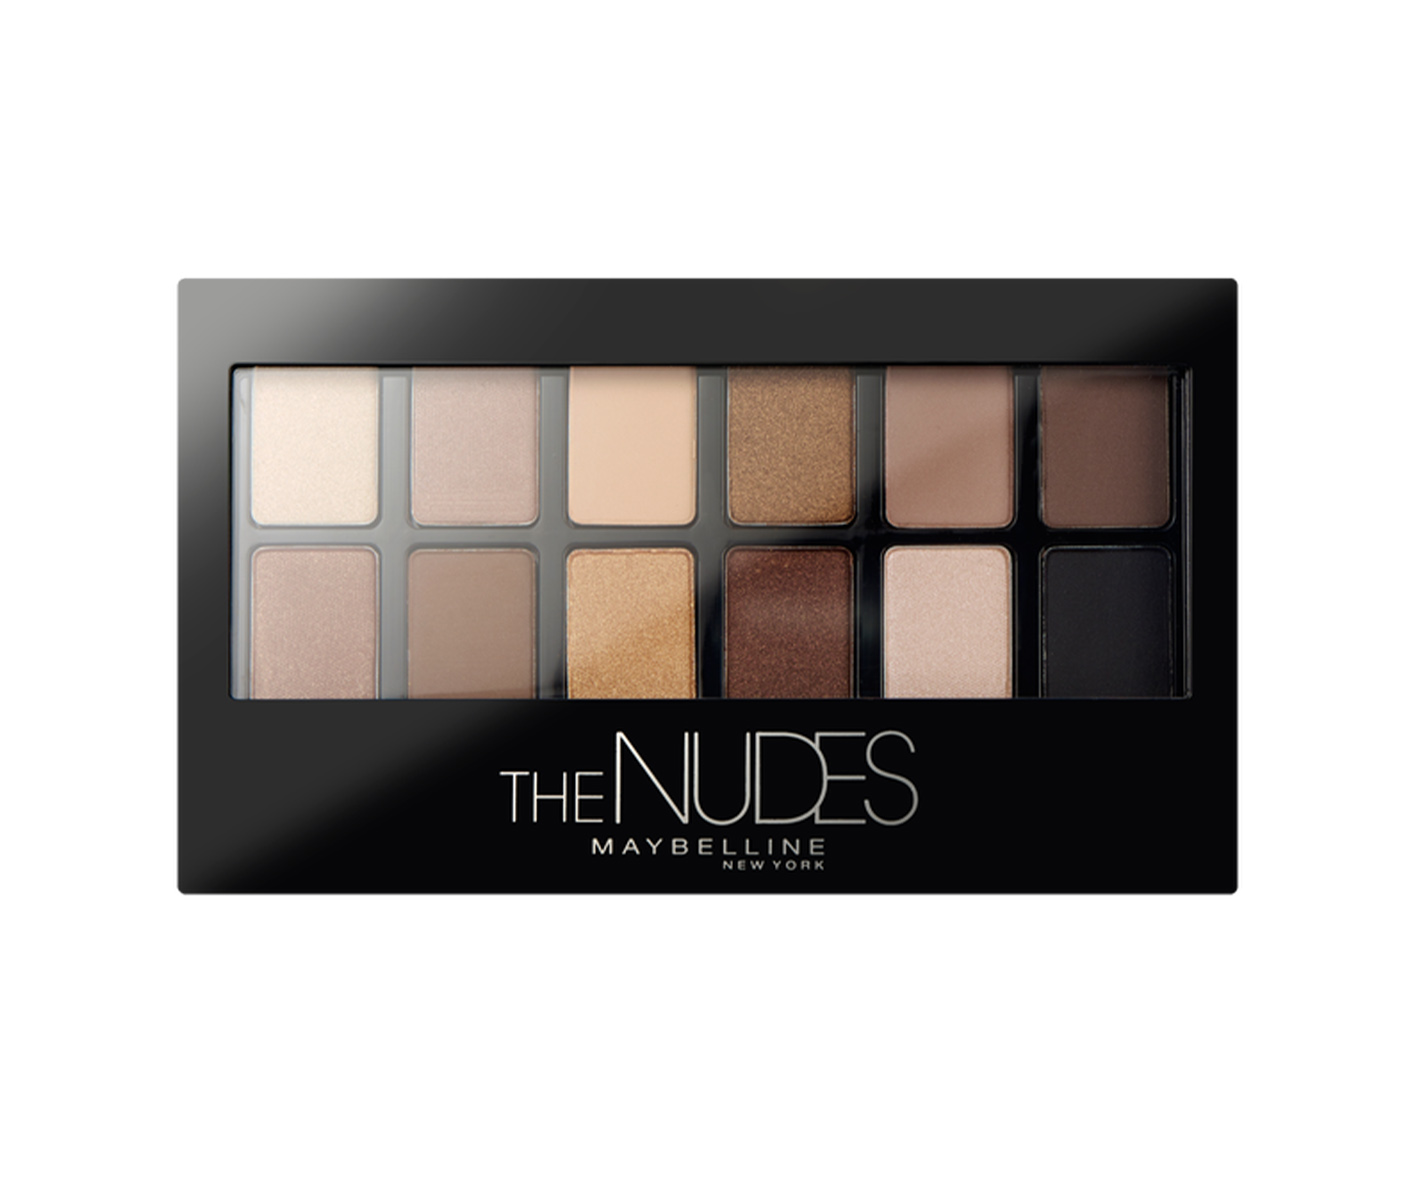 Maybelline The Nudes, paletka cieni